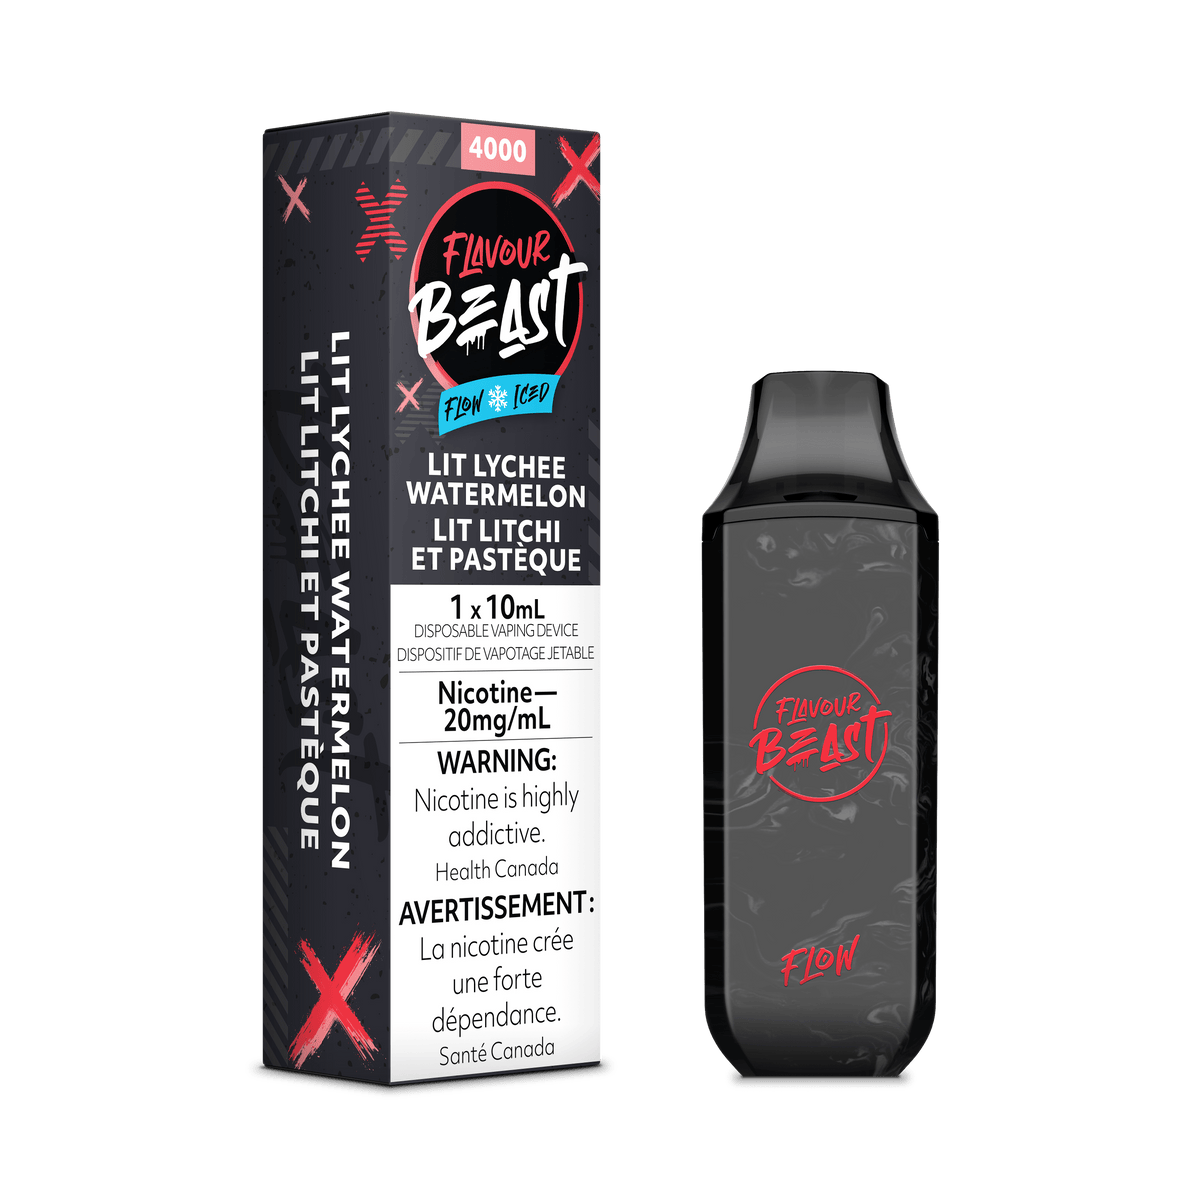 Flavour Beast Flow Disposable Vape - Lit Lychee Watermelon Iced available on Canada online vape shop